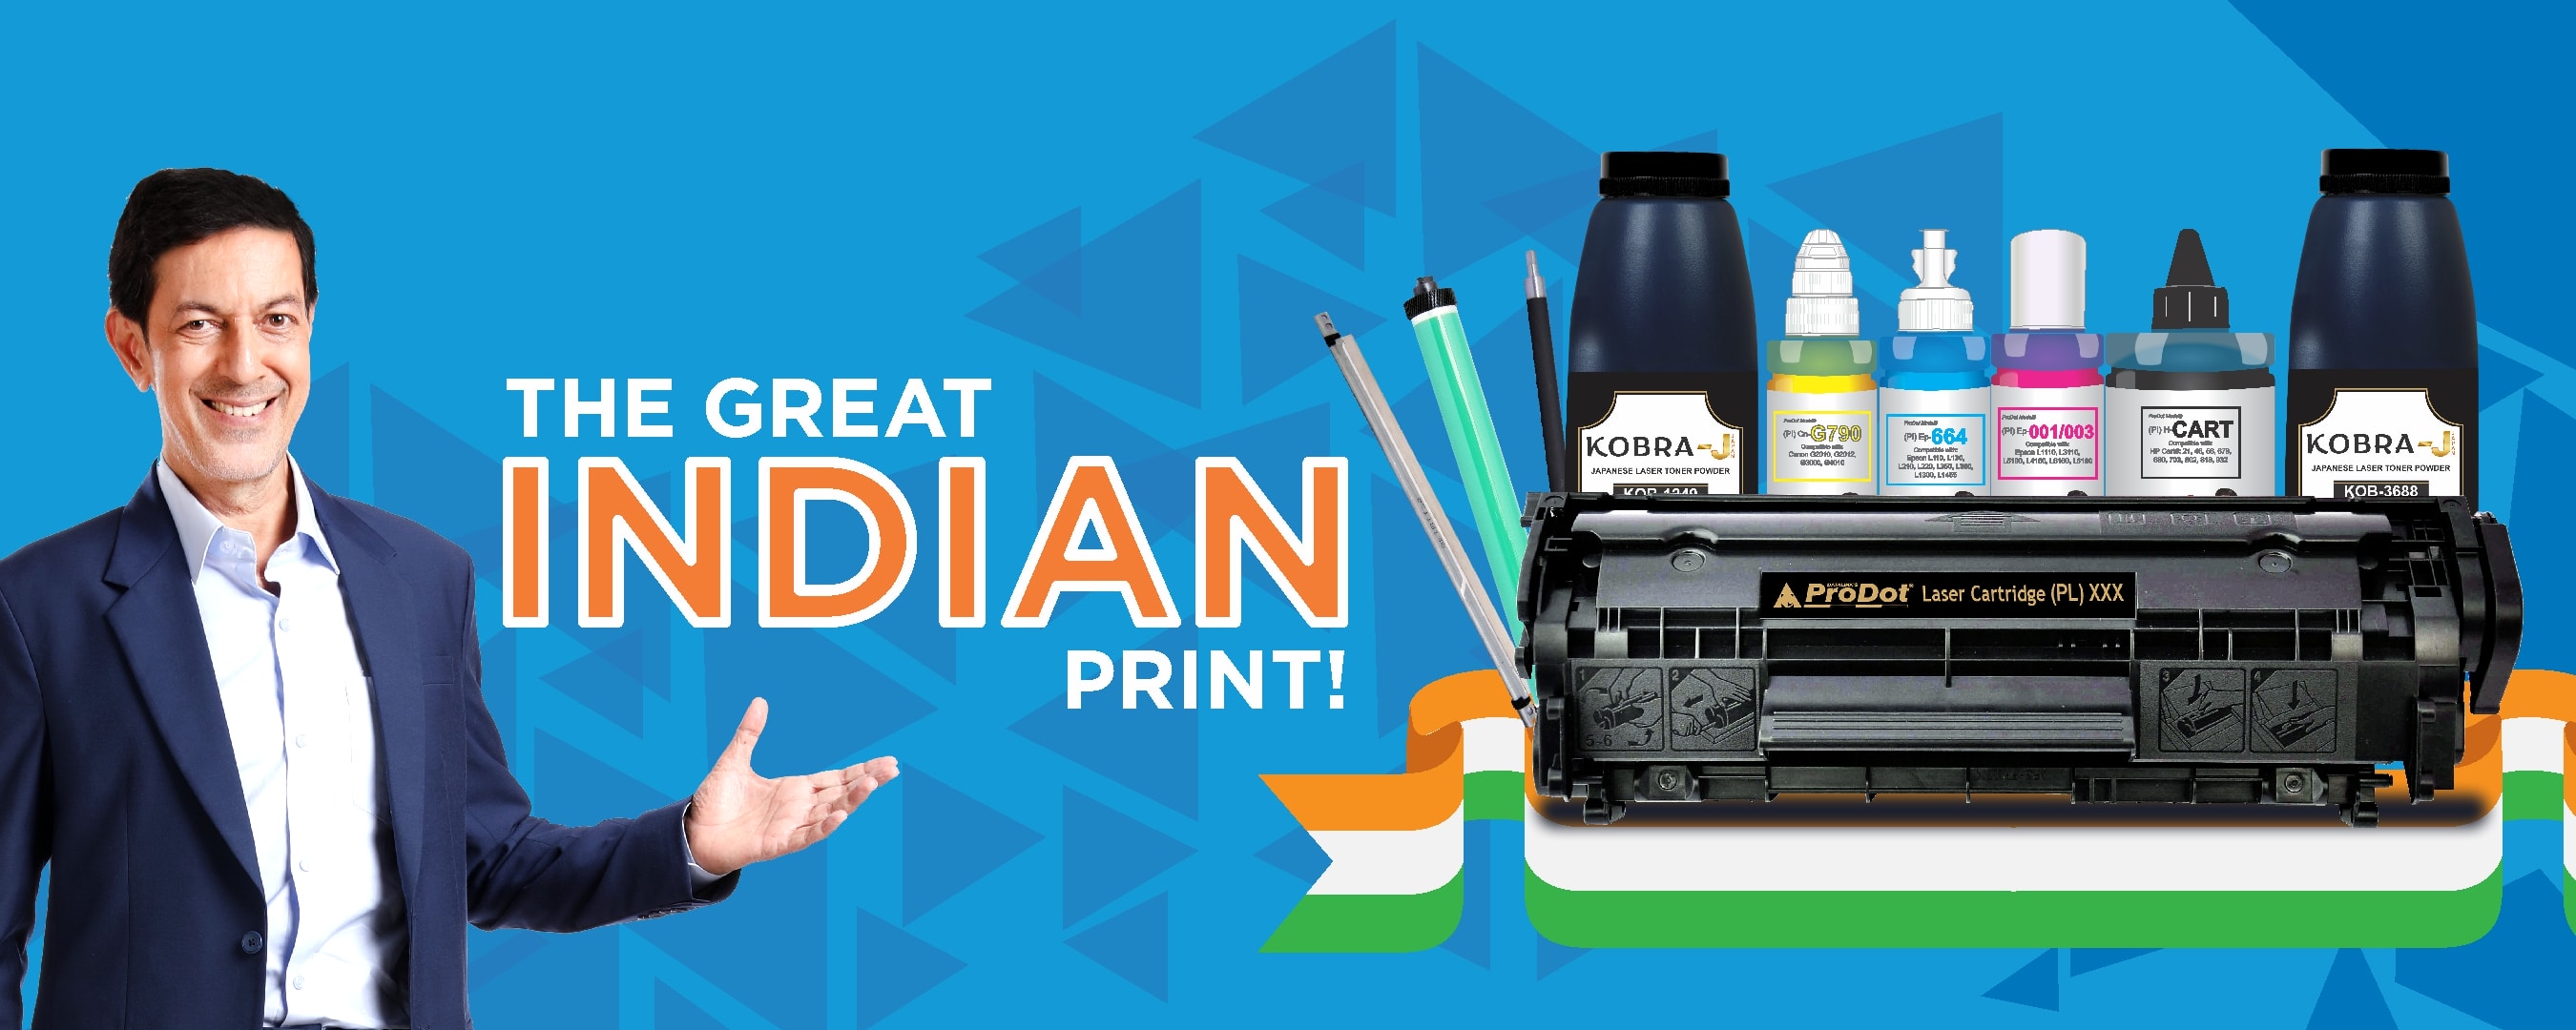 THE_GREAT_INDIAN_PRINT_BANNER_FOR_WEB.jpg